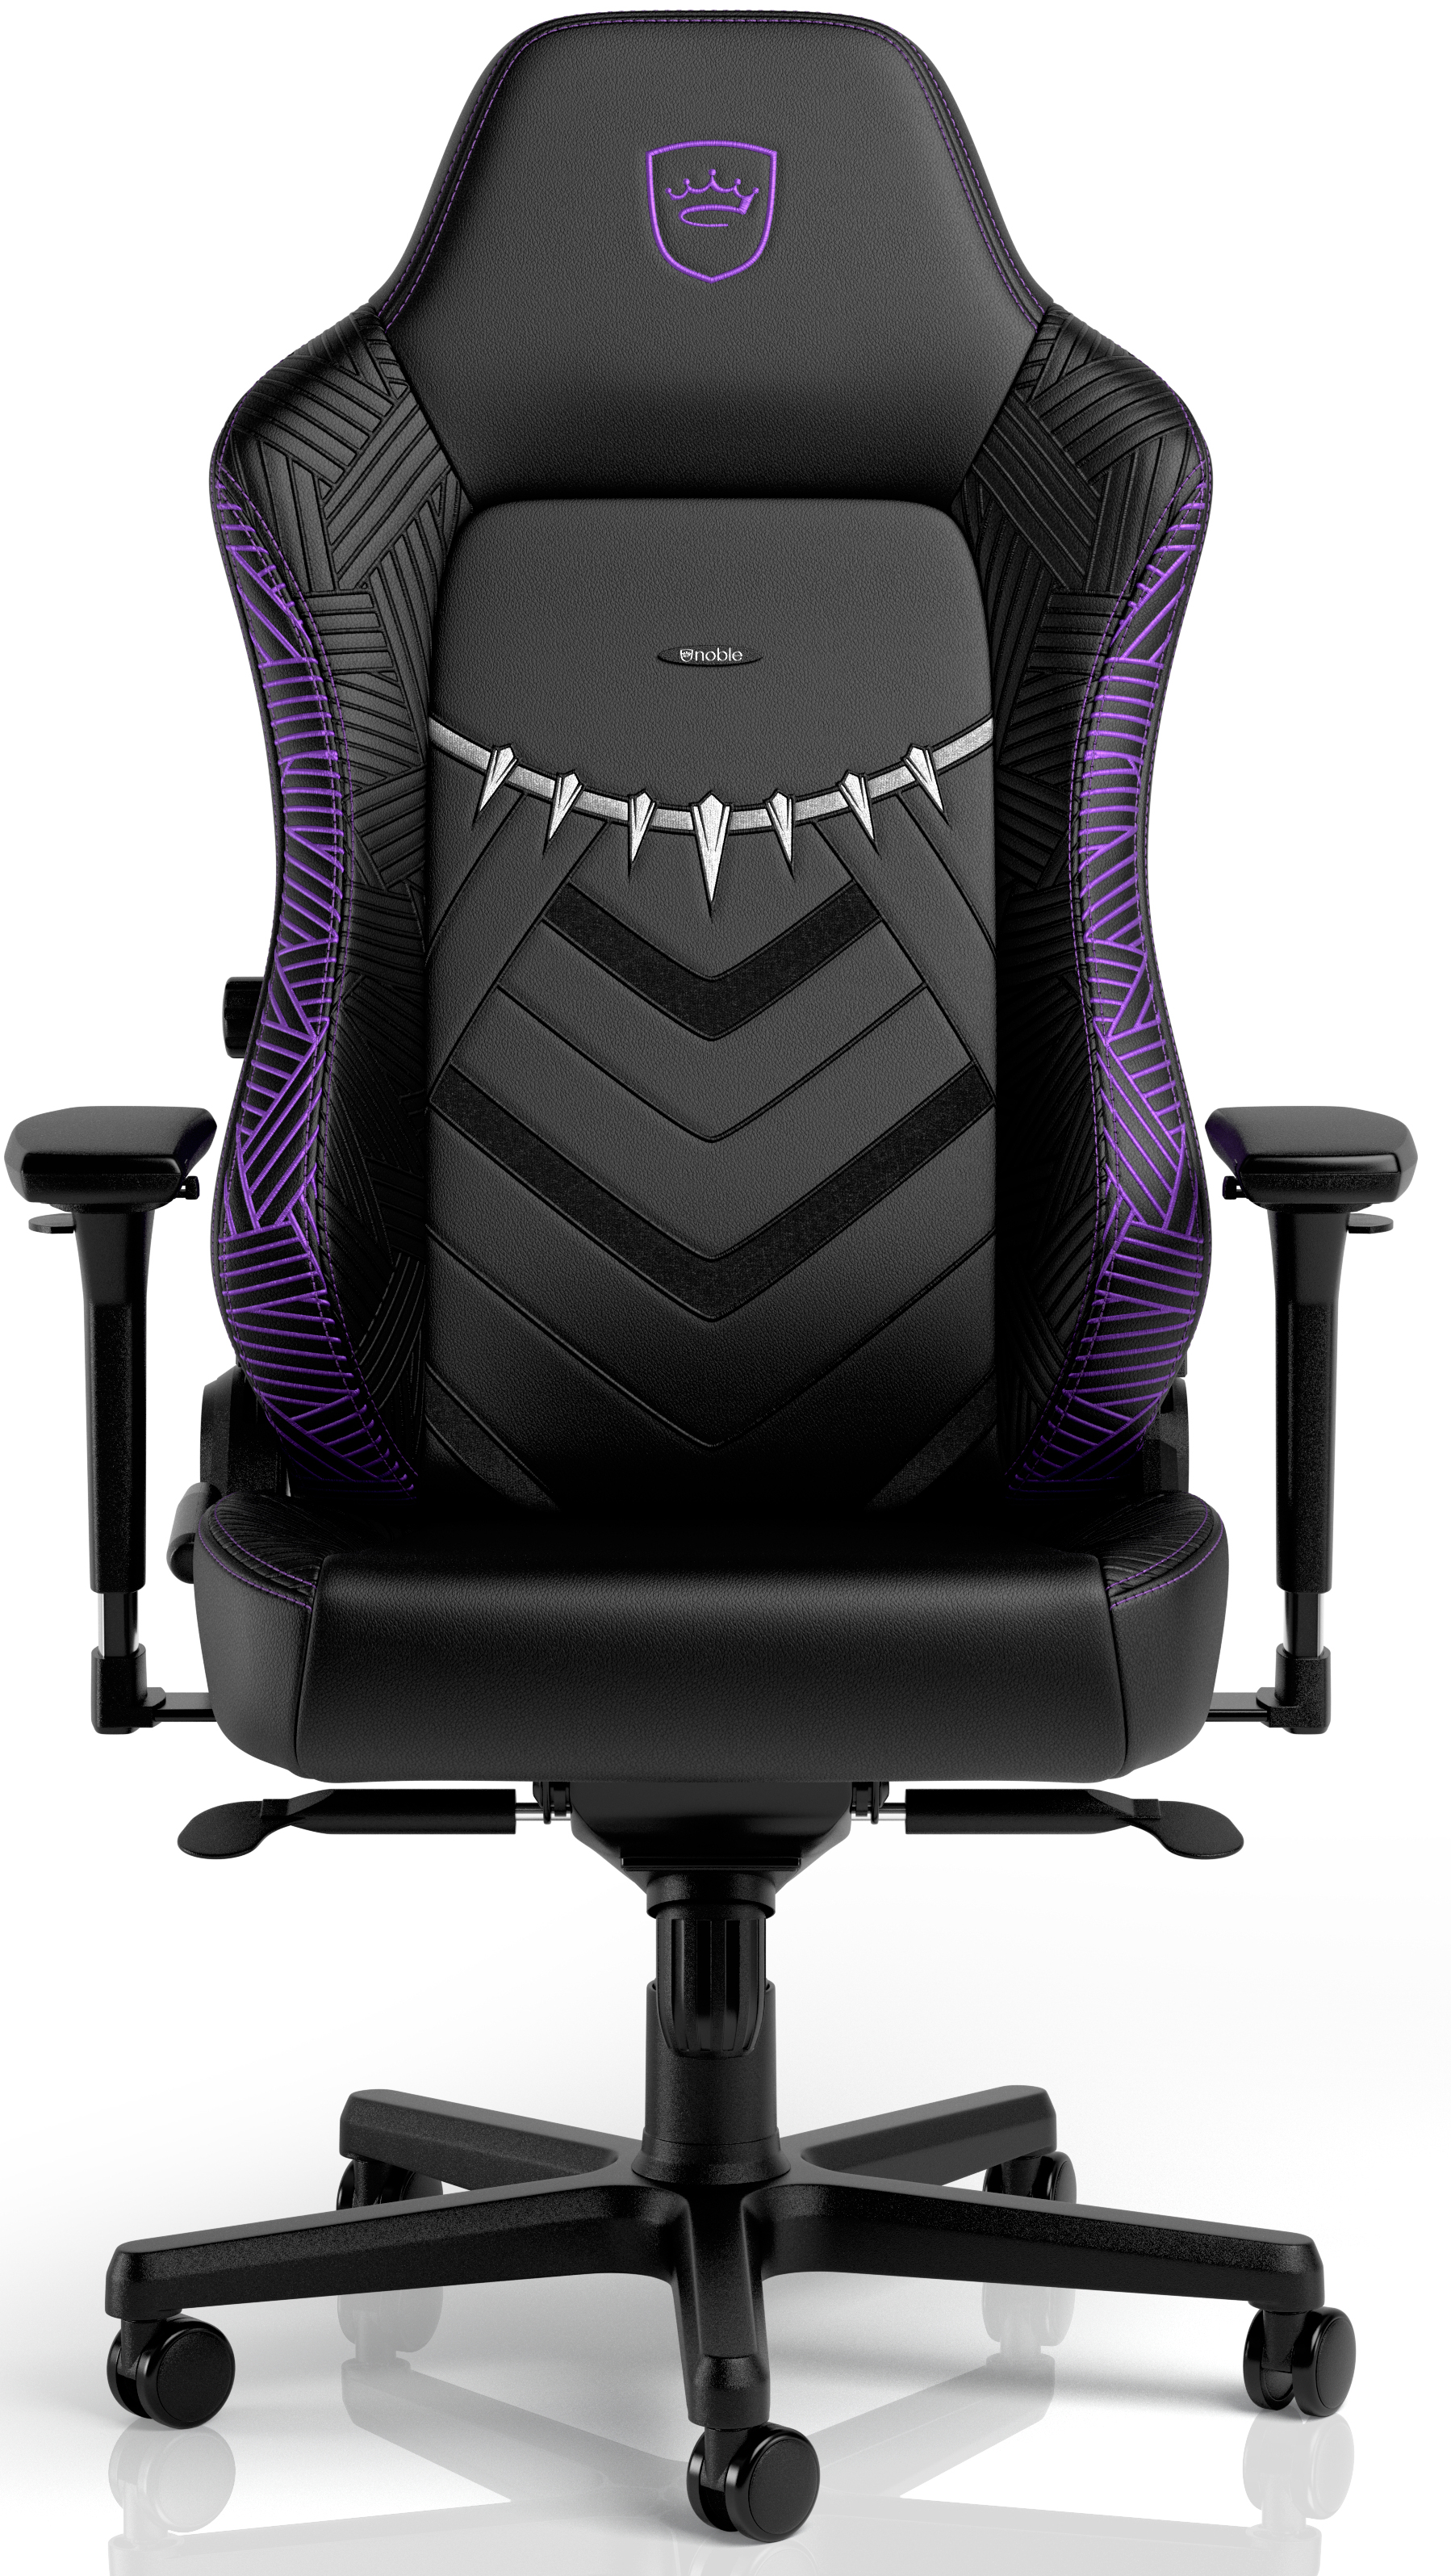 noblechairs - ** B Grade ** Silla noblechairs HERO - Black Panther Edition